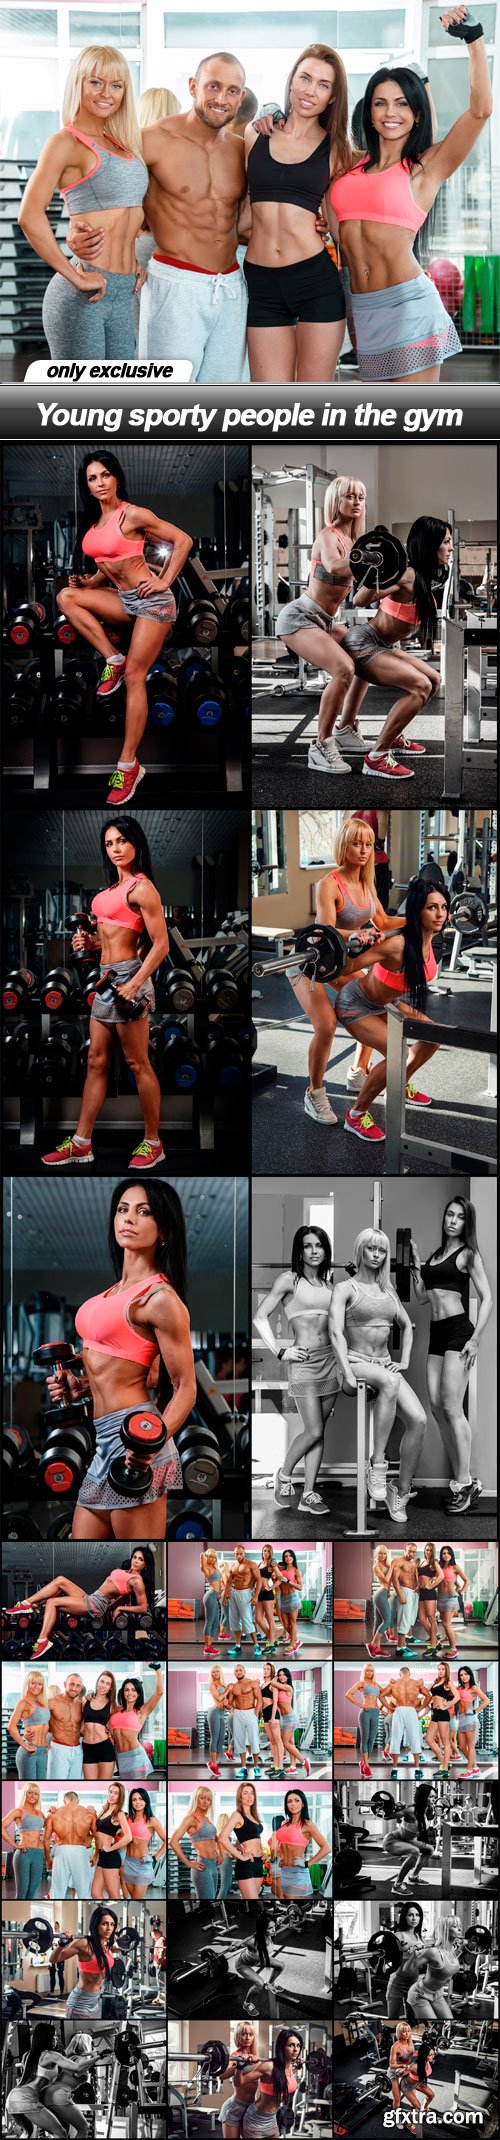 Young sporty people in the gym - 21 UHQ JPEG